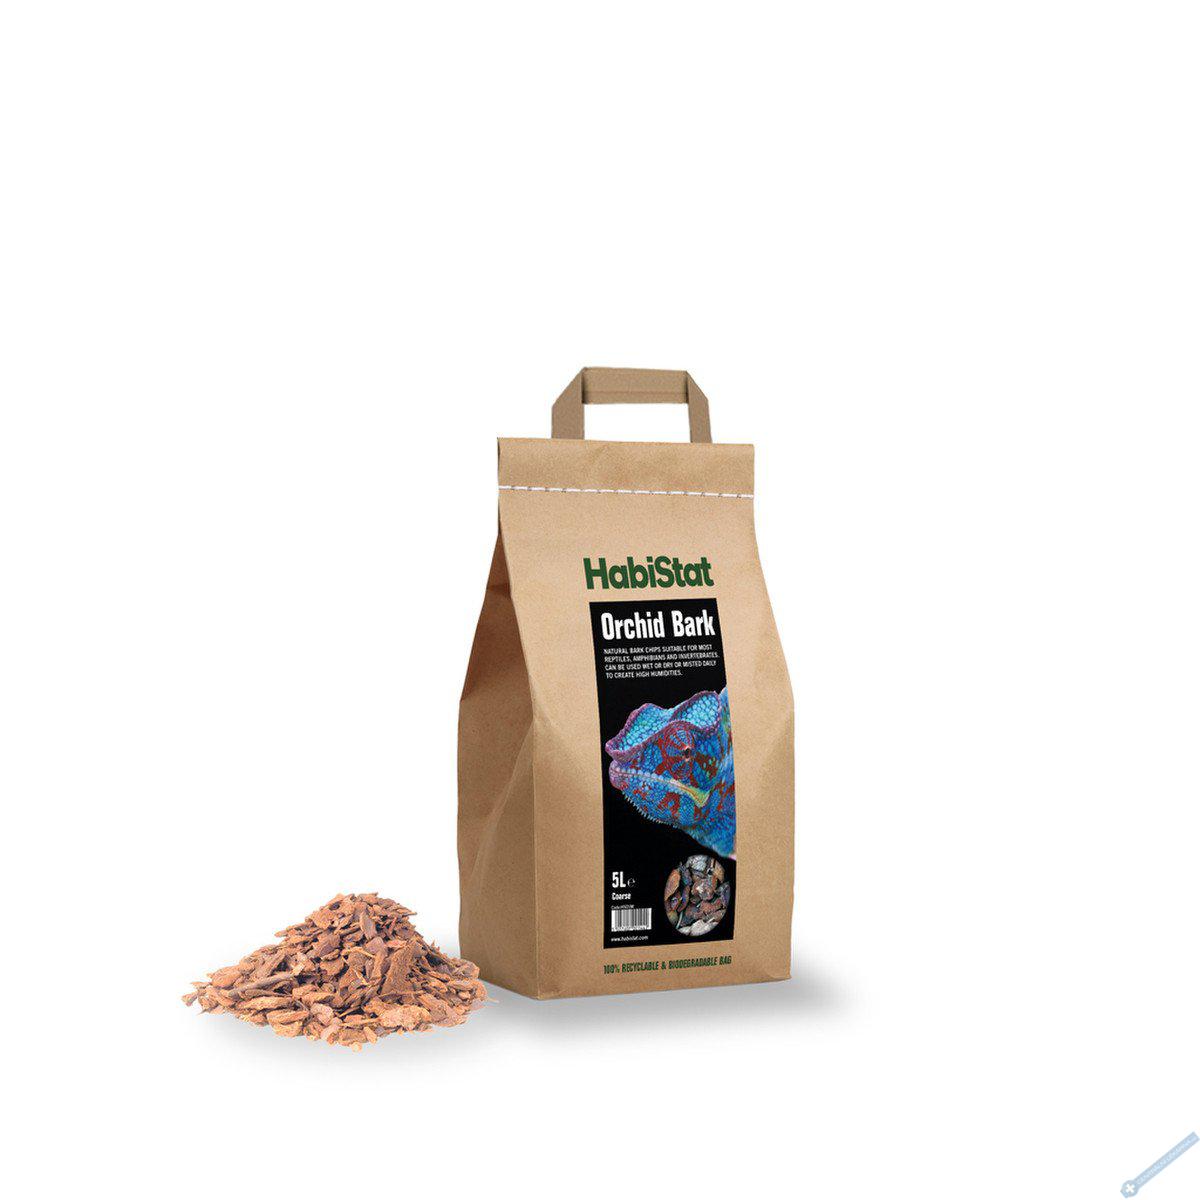 HabiStat Orchid Bark Substrate hrub 5l